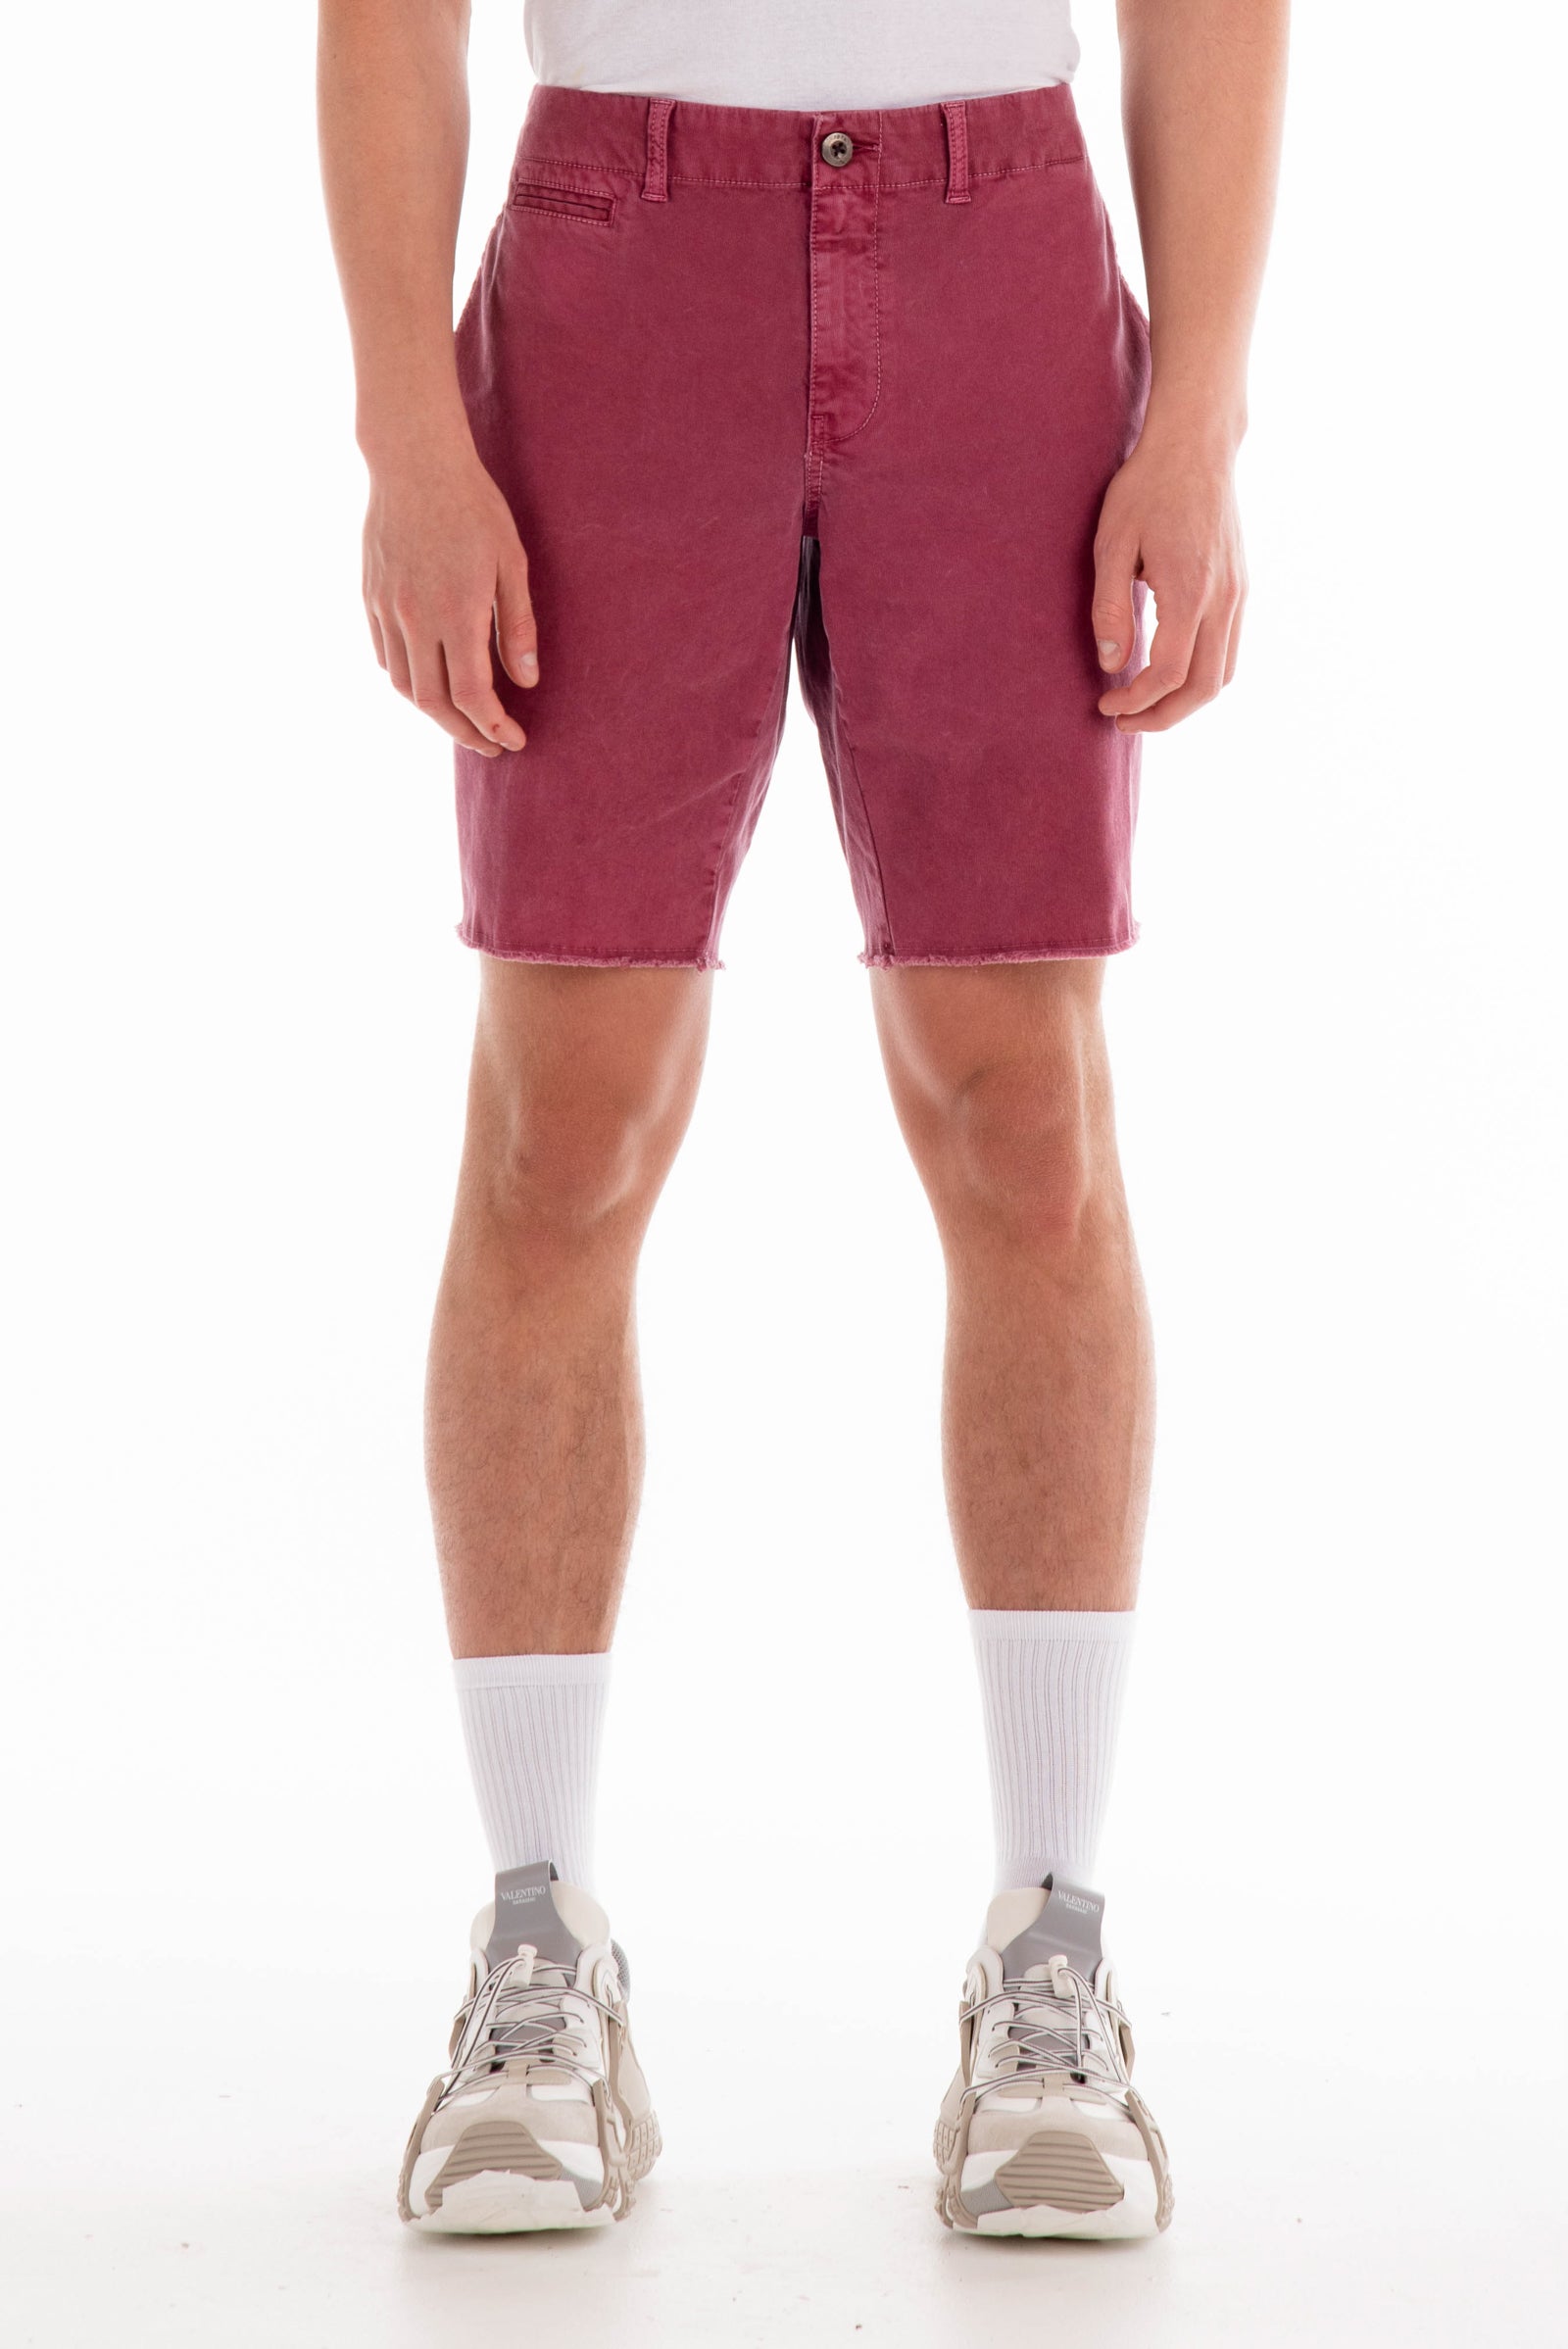 Original Paperbacks Rockland Chino Short in Crushed Berry on Model Cropped Front View